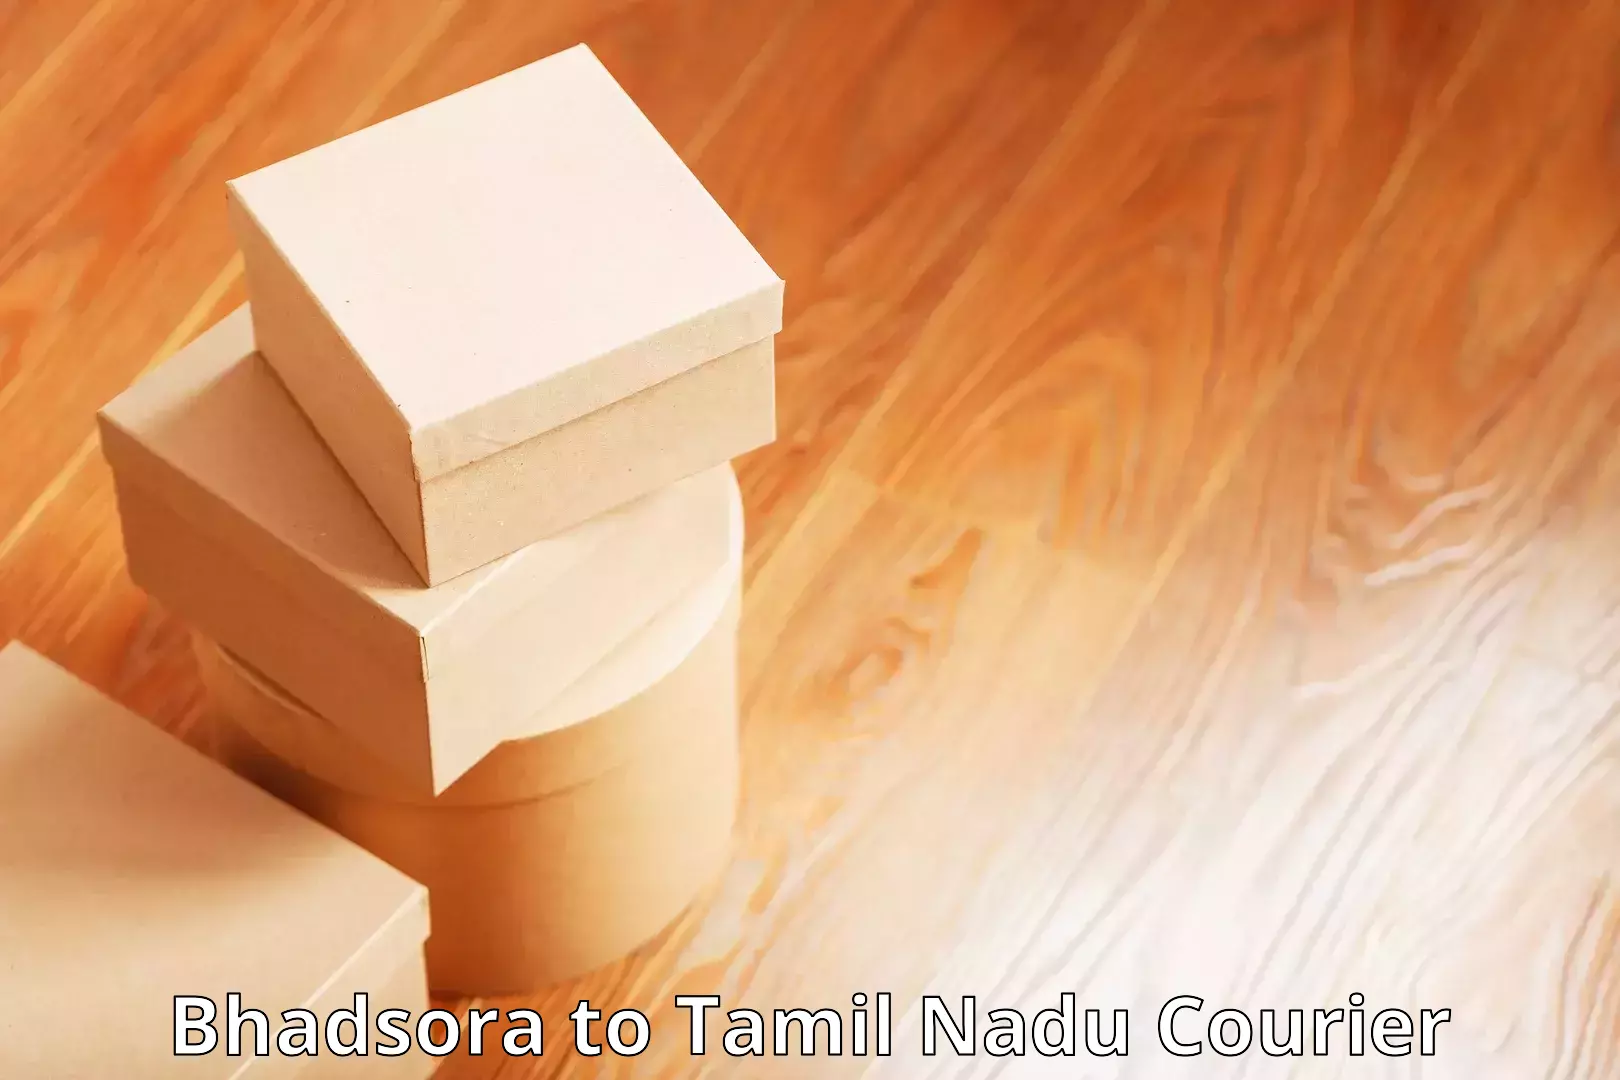 Personalized courier experiences Bhadsora to Tamil Nadu